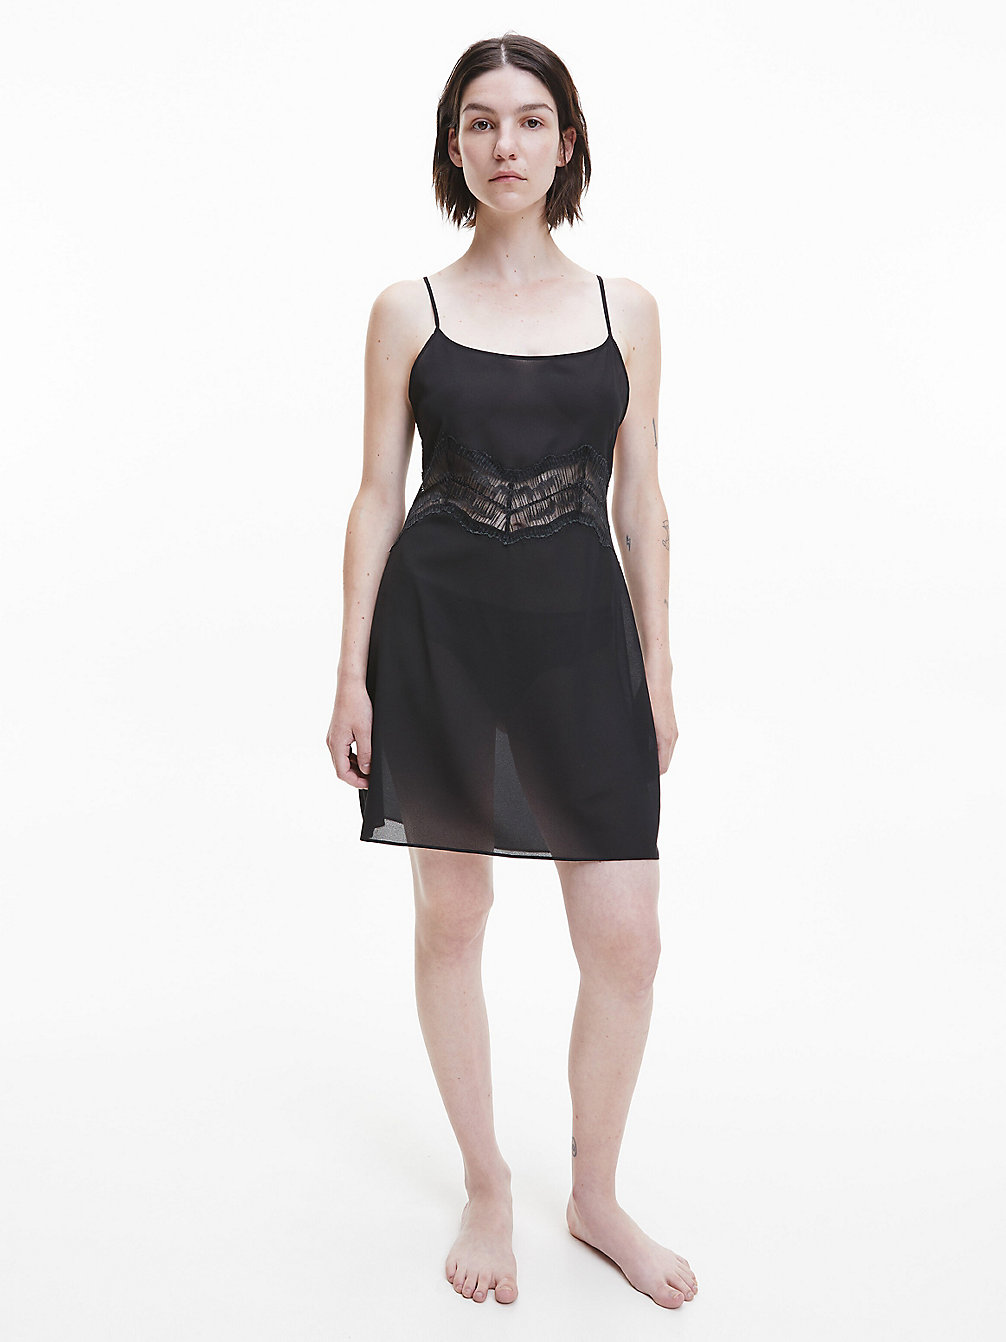 BLACK Satin And Lace Night Dress undefined women Calvin Klein